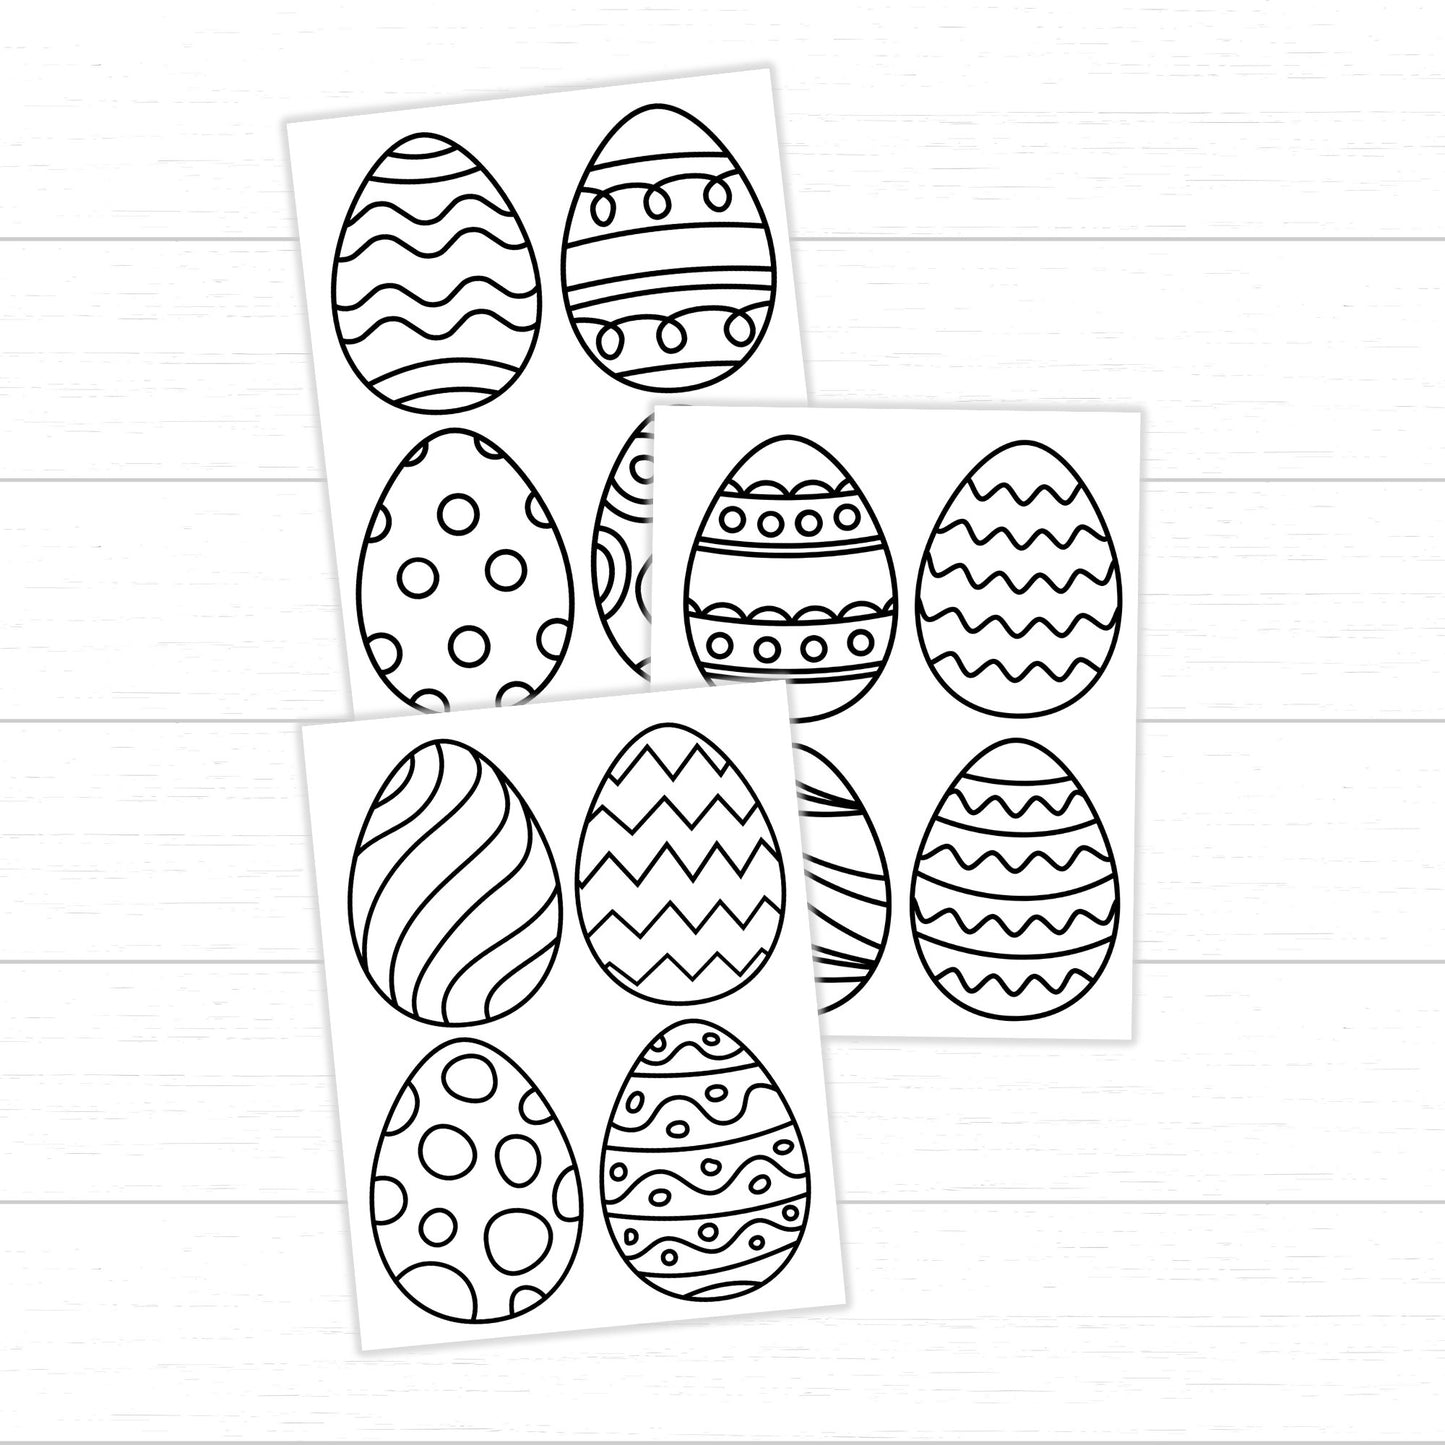 Easter Egg Coloring Pages, Easter Printables for Kids, Printable Easter Coloring Pages, Easter Egg Coloring Activity, Easter Coloring